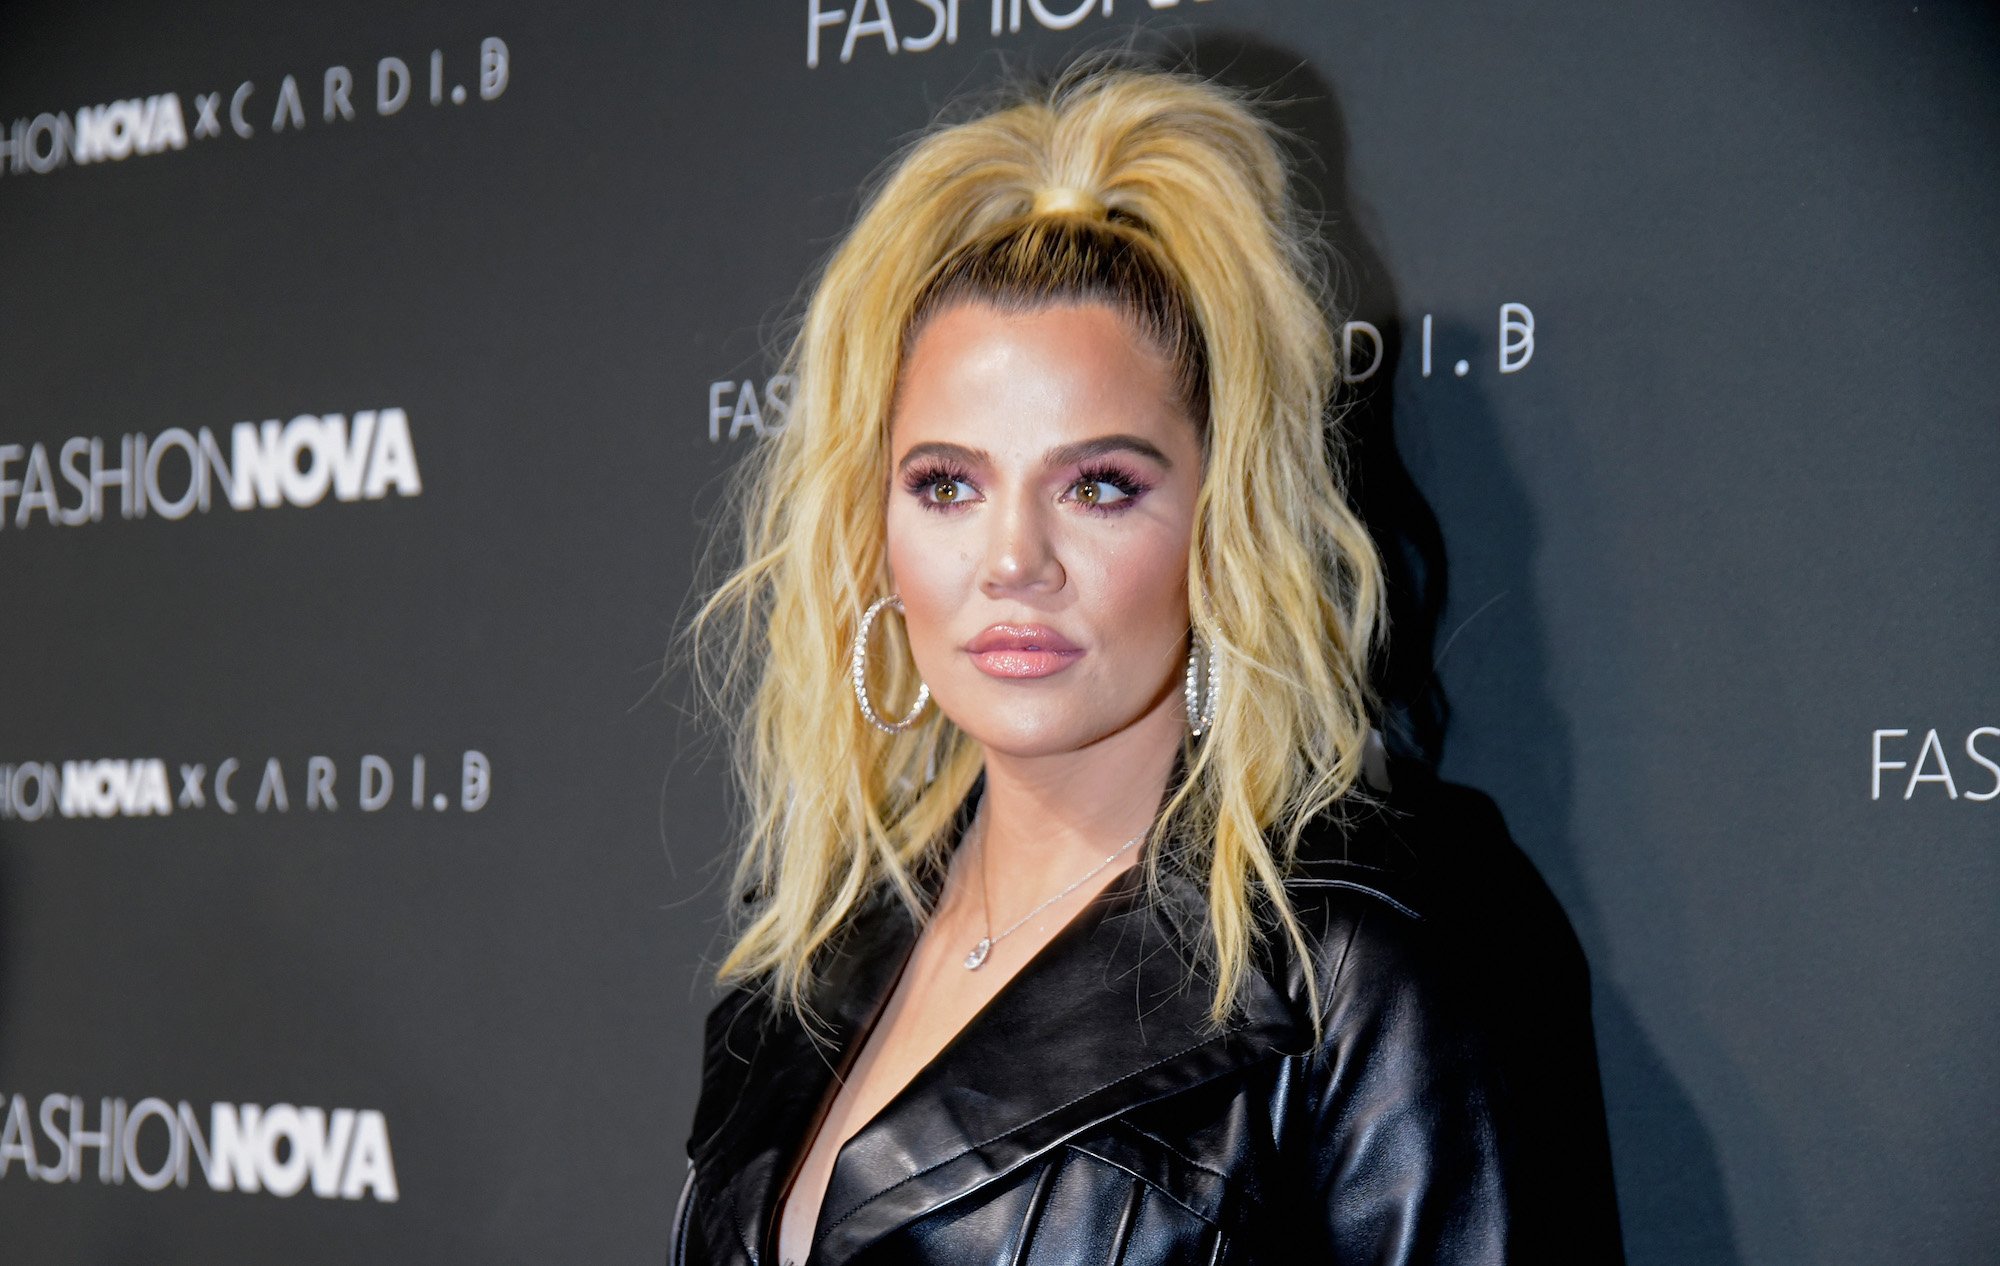 Khloé Kardashian looking off to the side in front of a gray background